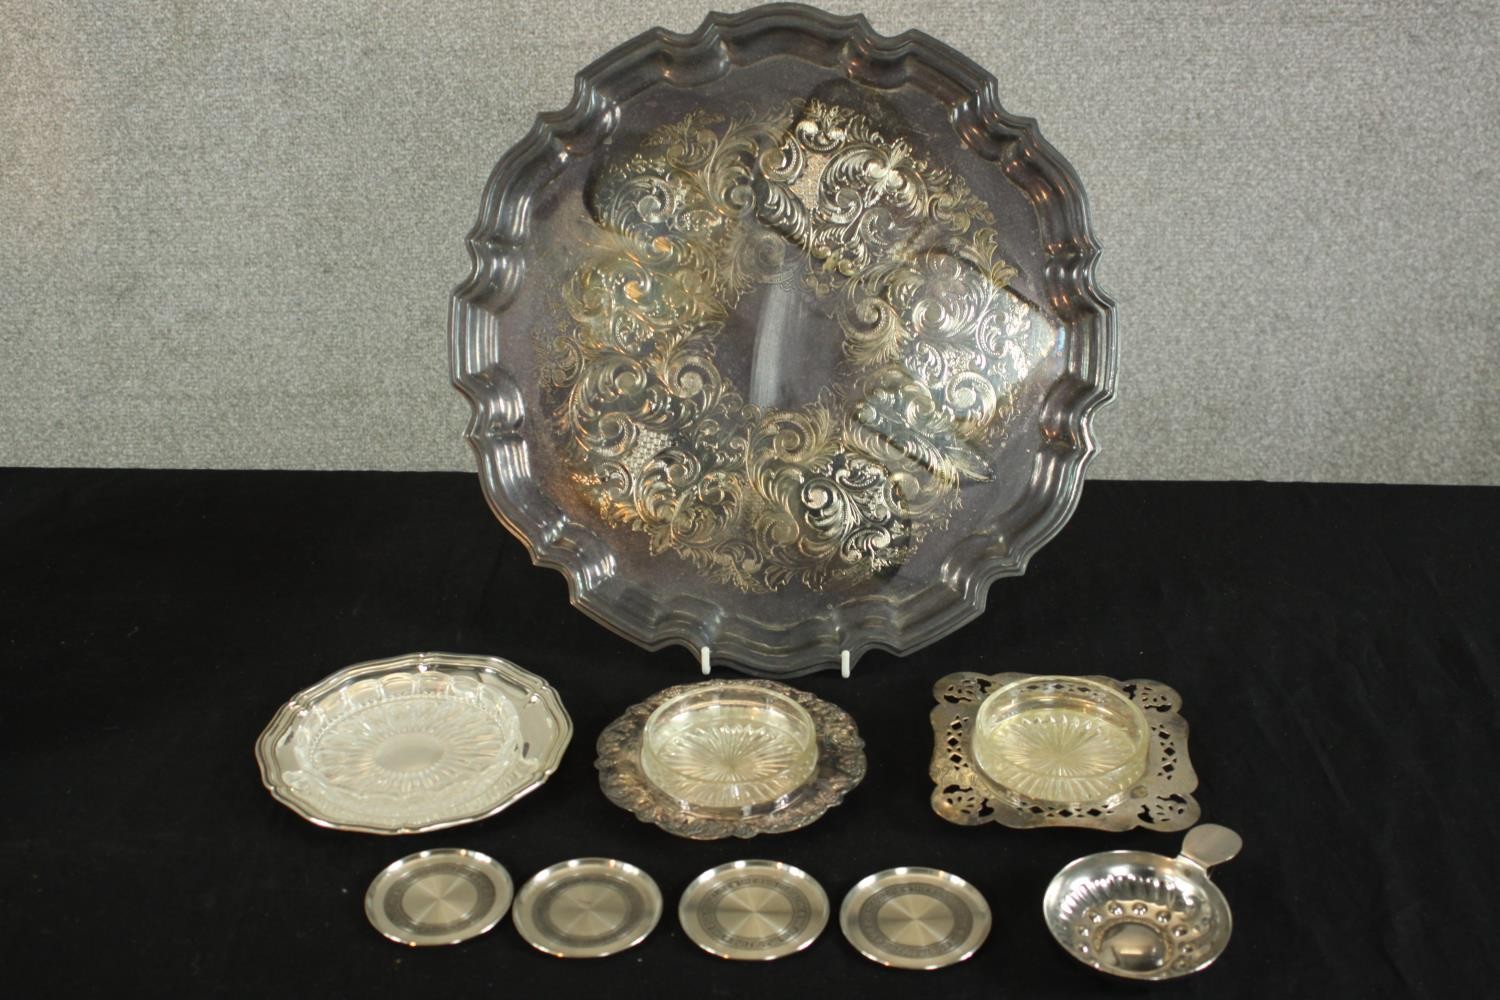 A collection of silver plate and pewter, including three pierced design butter dishes, a taste de